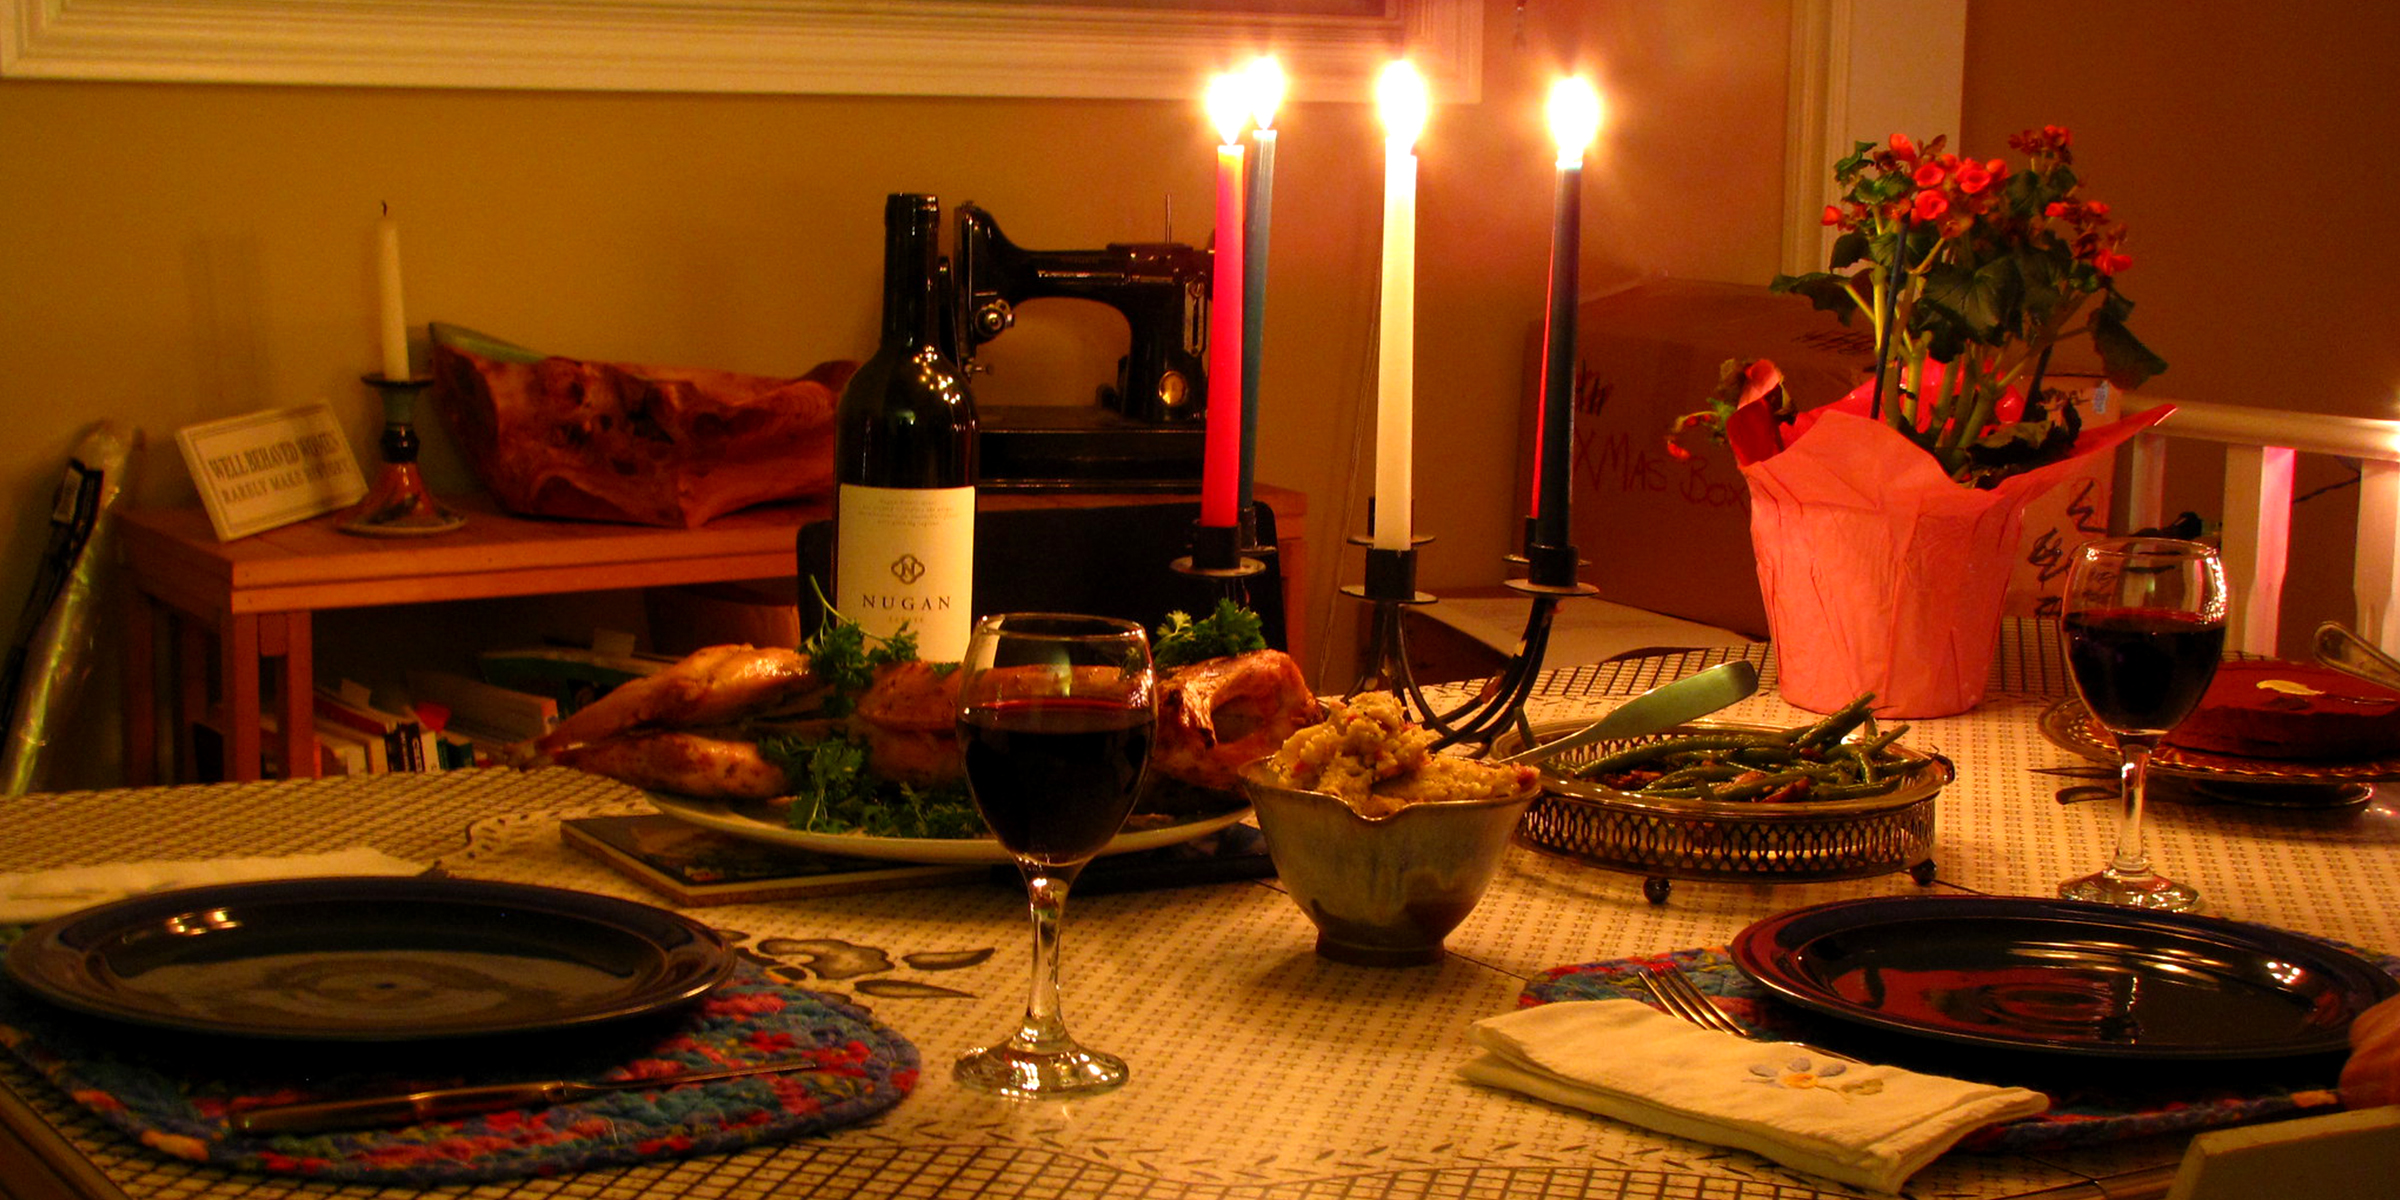 A romantic dinner setting | Source: Flickr